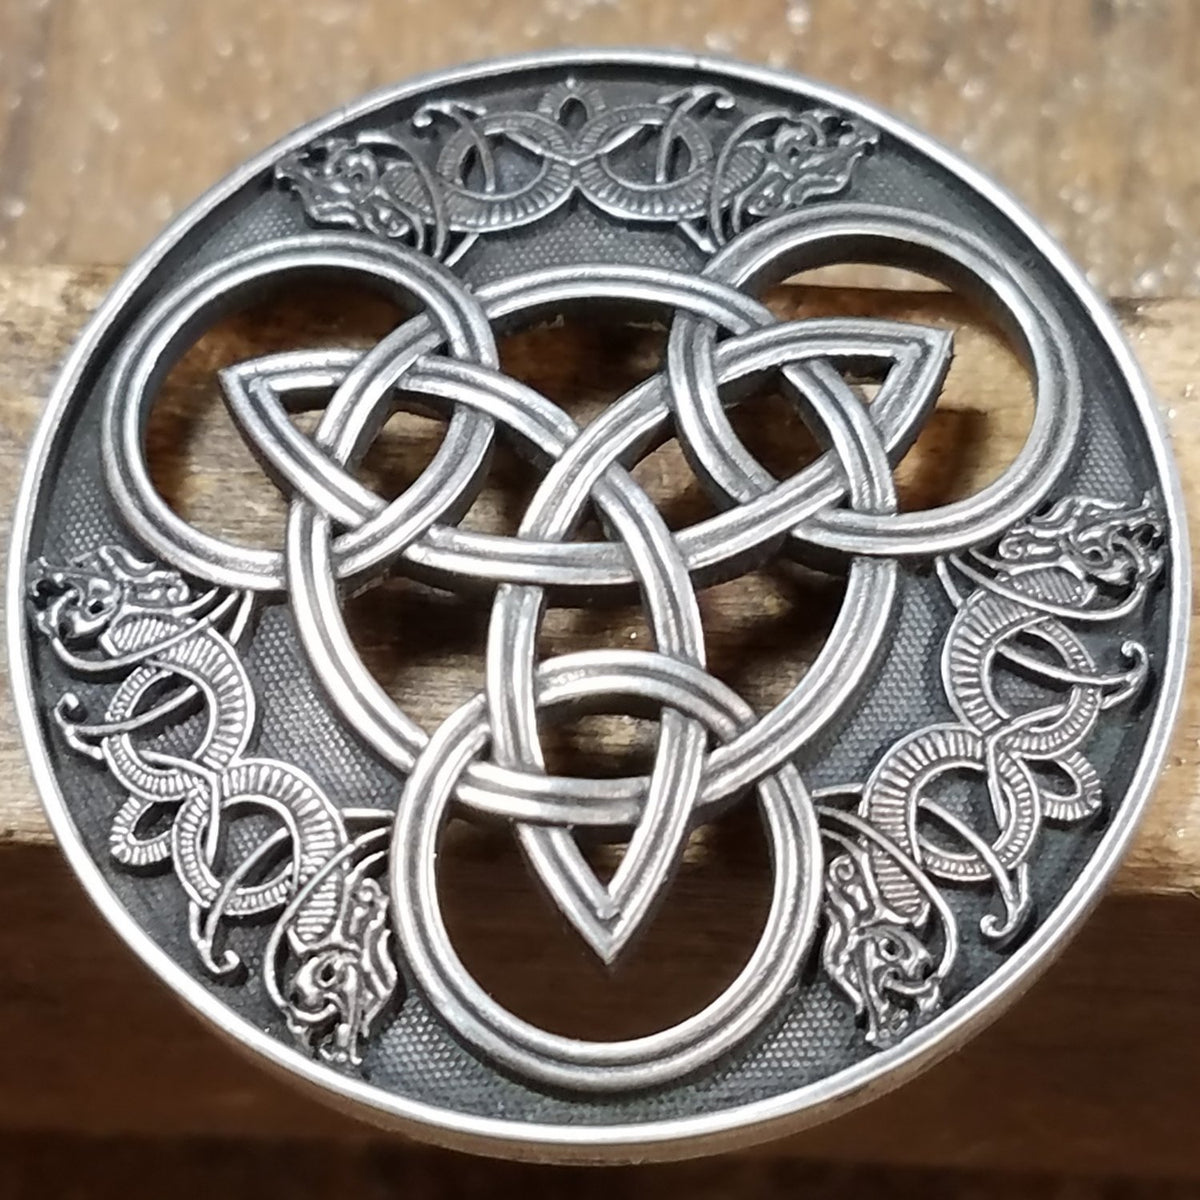 DRAGON TRIQUETRA Pendant - 40% OFF GOLD UNLEASH THE DRAGONS SALE Starting at $779 - Celtic Jewelscapes